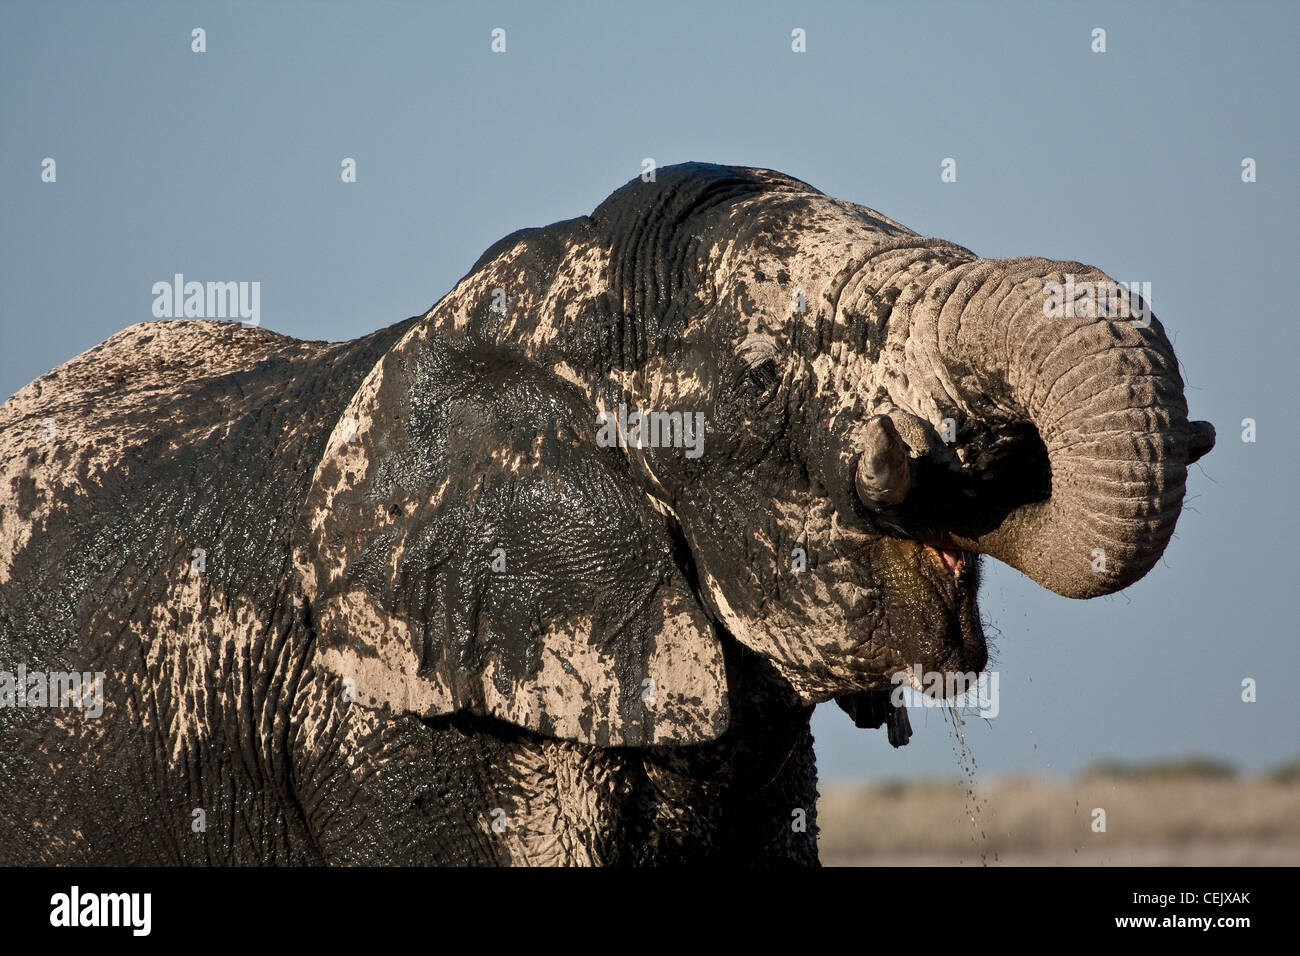 Hot and thirsty elephant at an Etosha National Park waterhole. Mud cools and protects his skin and water quenches a big thirst. Stock Photo